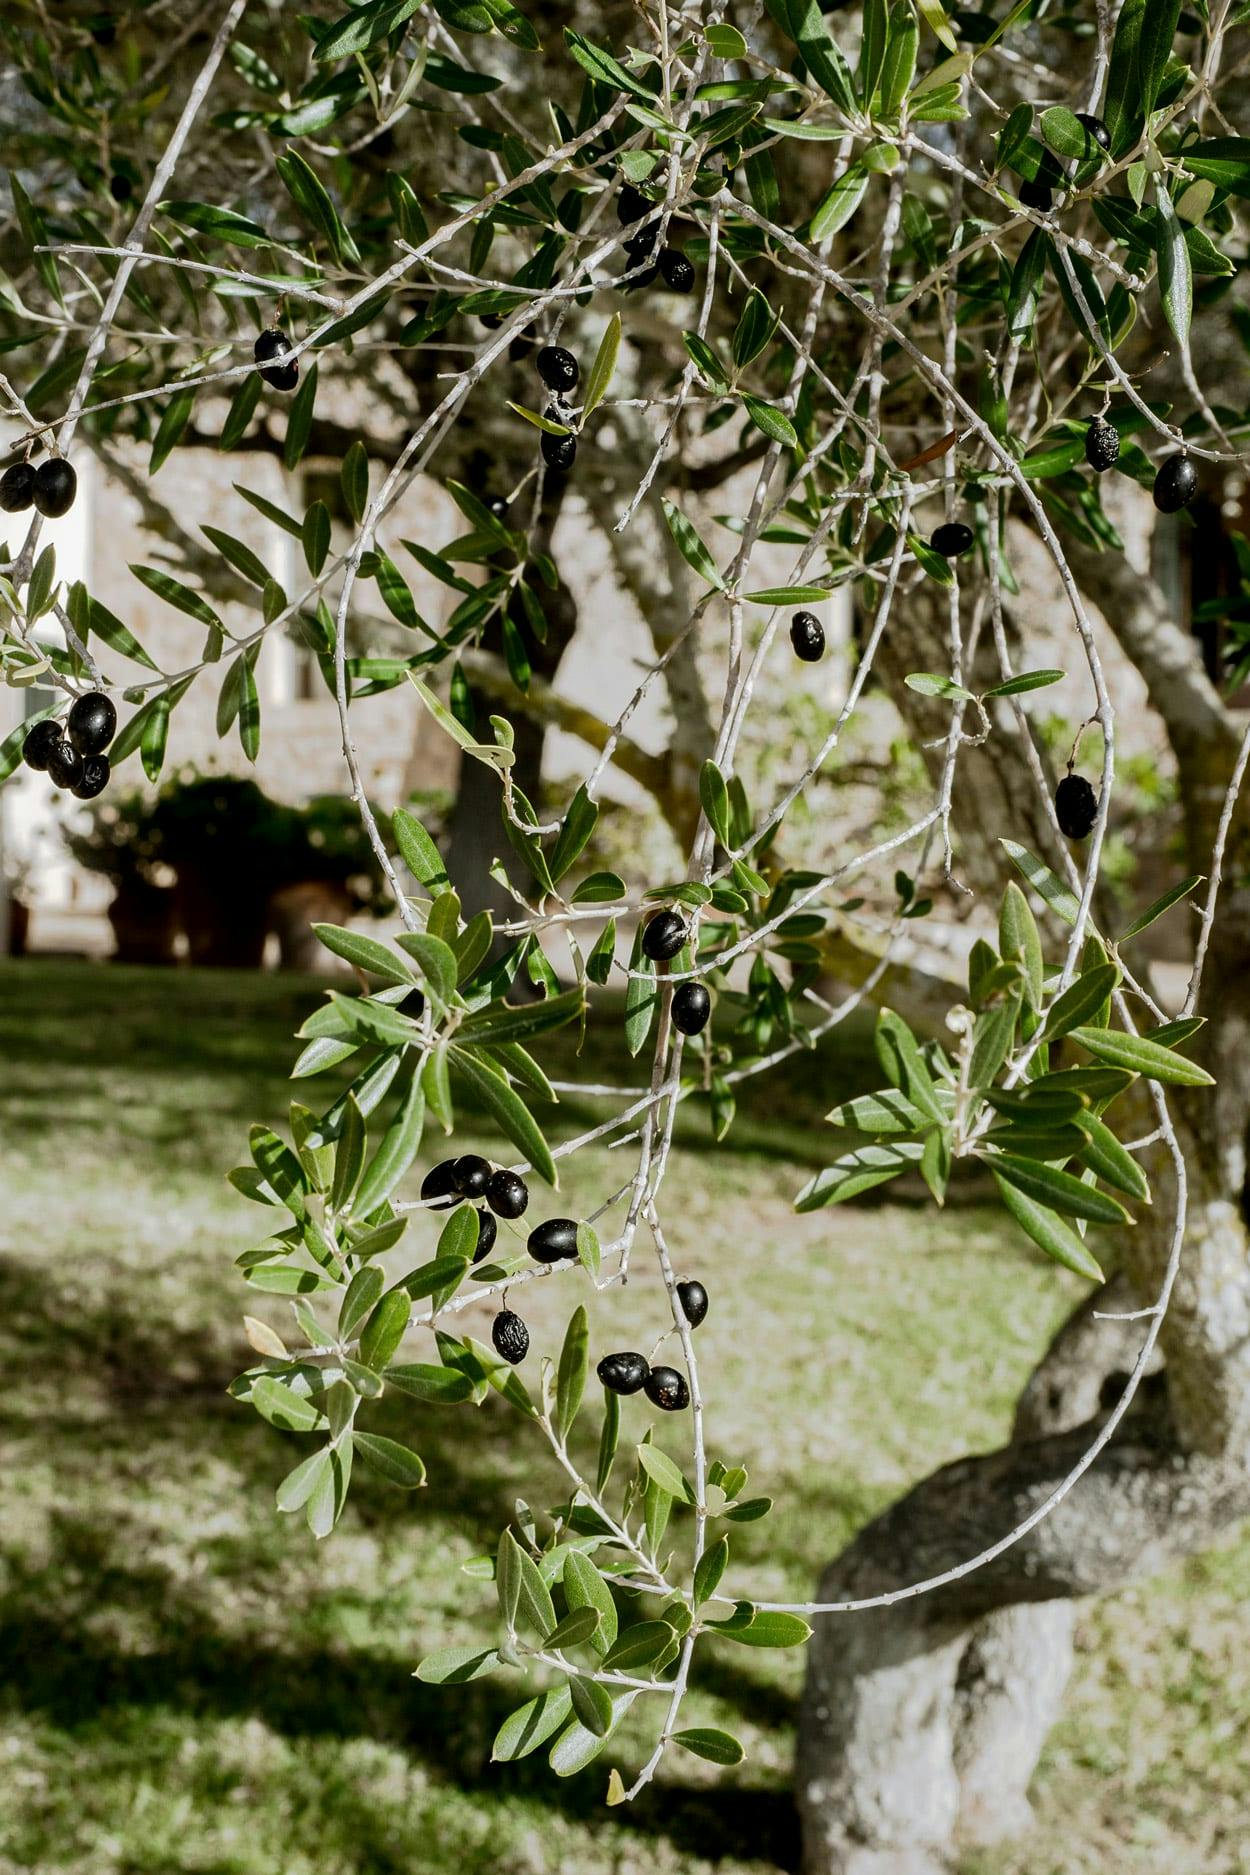 A tree with green leaves and black olives hanging from its branches is depicted in the image.